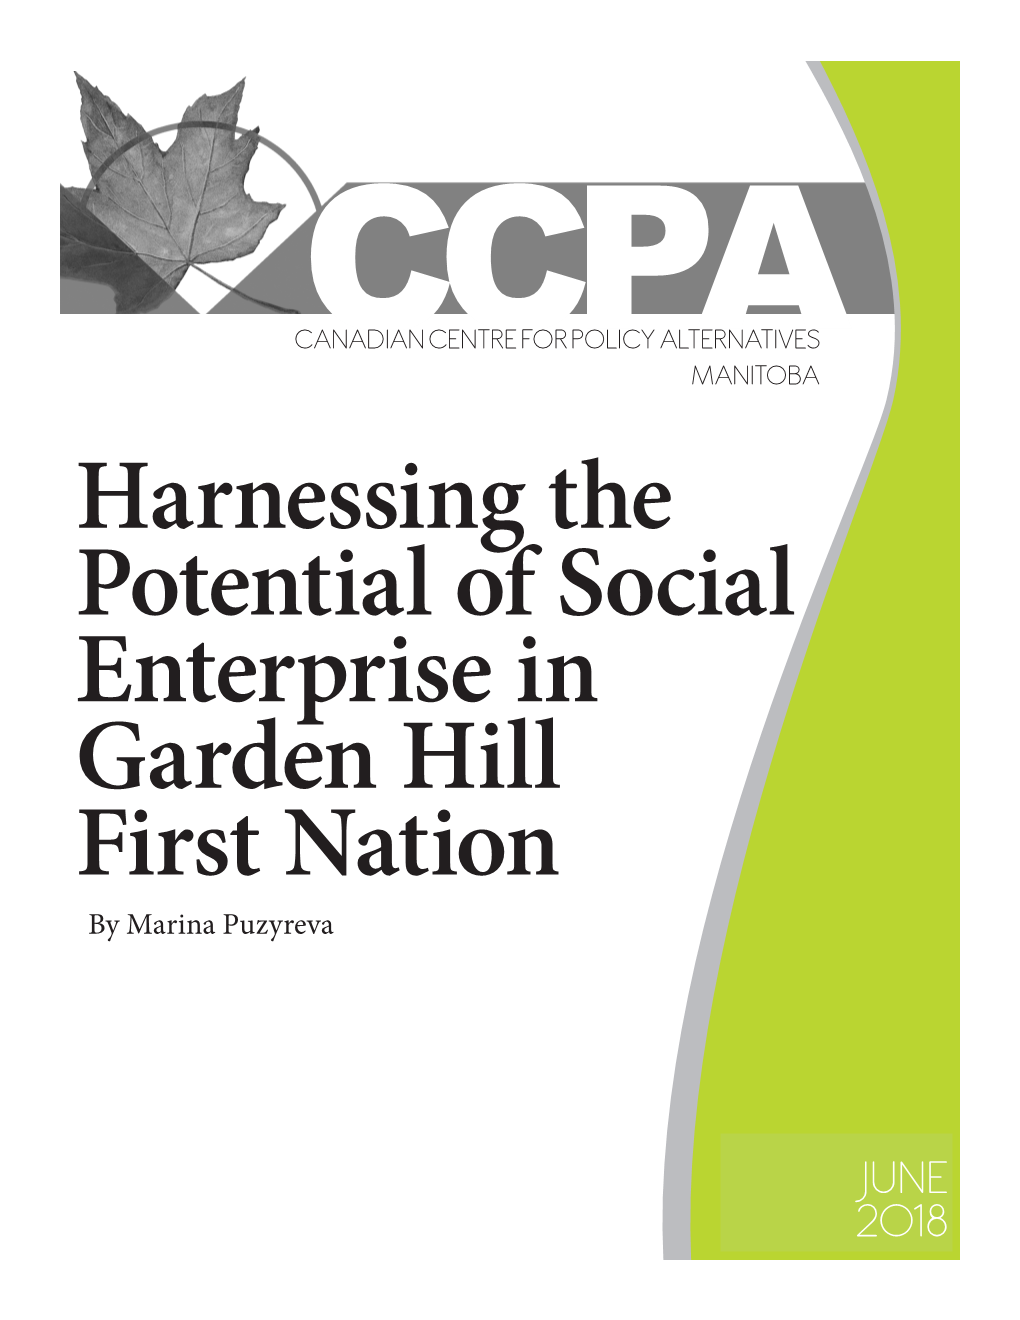 Harnessing the Potential of Social Enterprise in Garden Hill First Nation by Marina Puzyreva